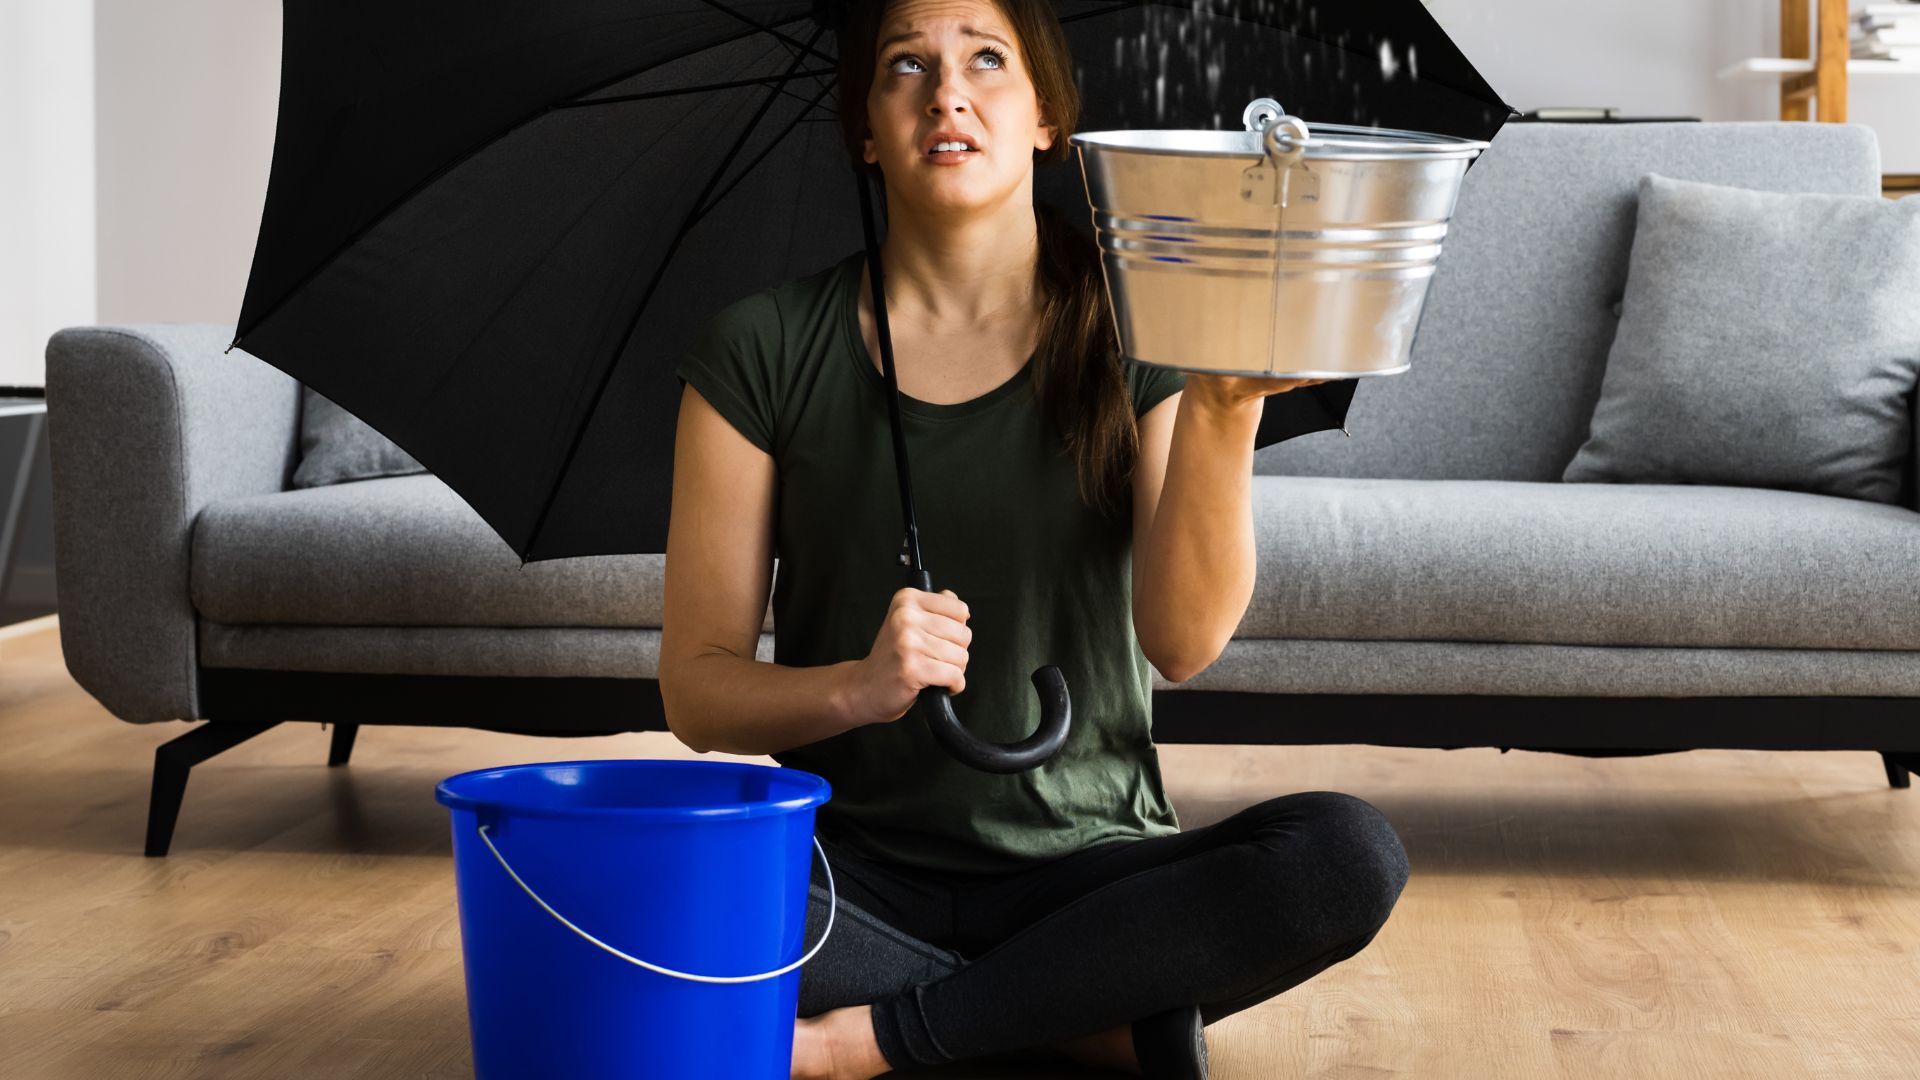 Image of a woman holding an umbrella, and a bucket catching water from the roof